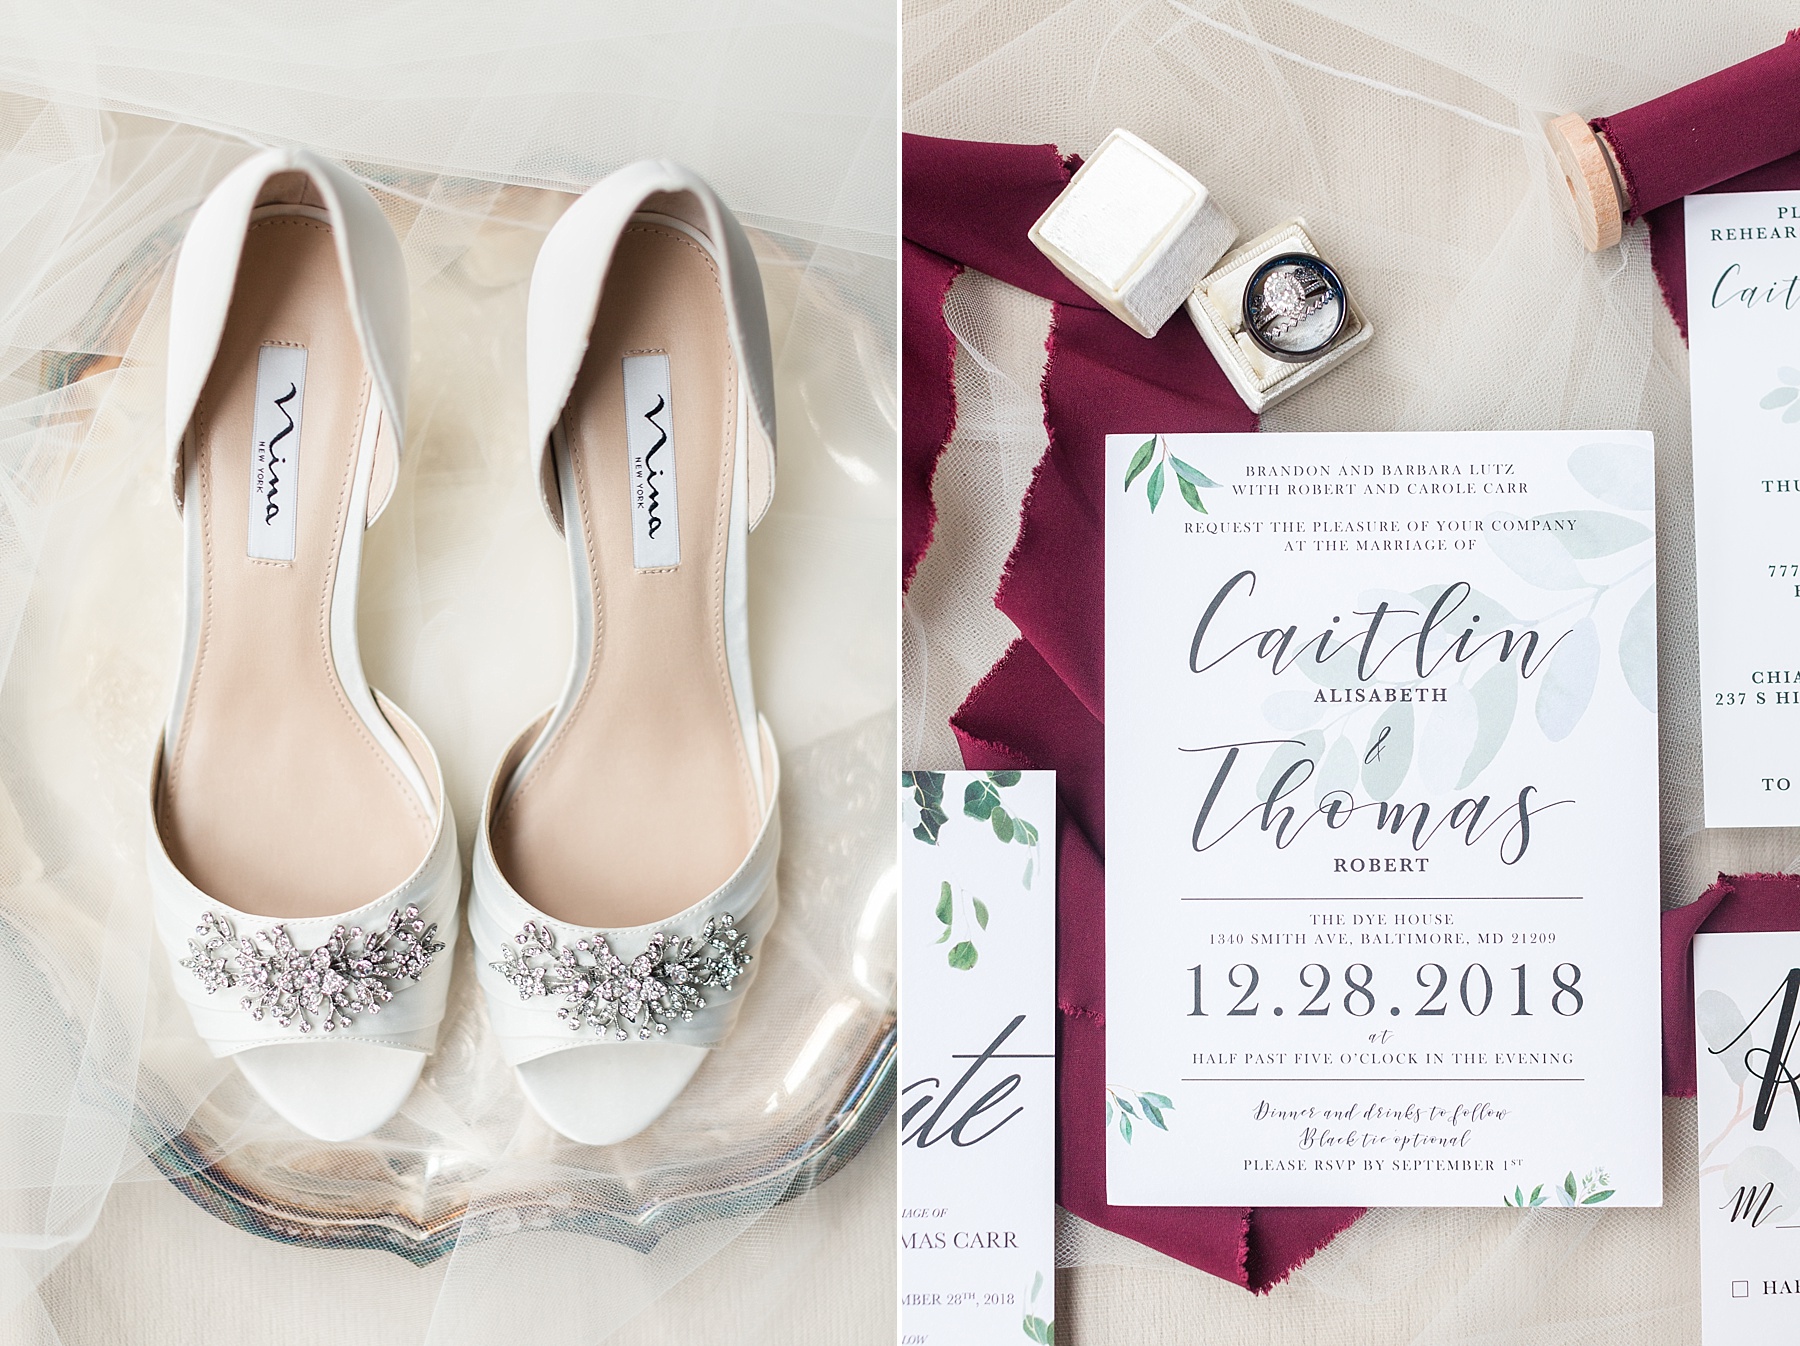 details for winter wedding photographed by Alexandra Mandato Photography